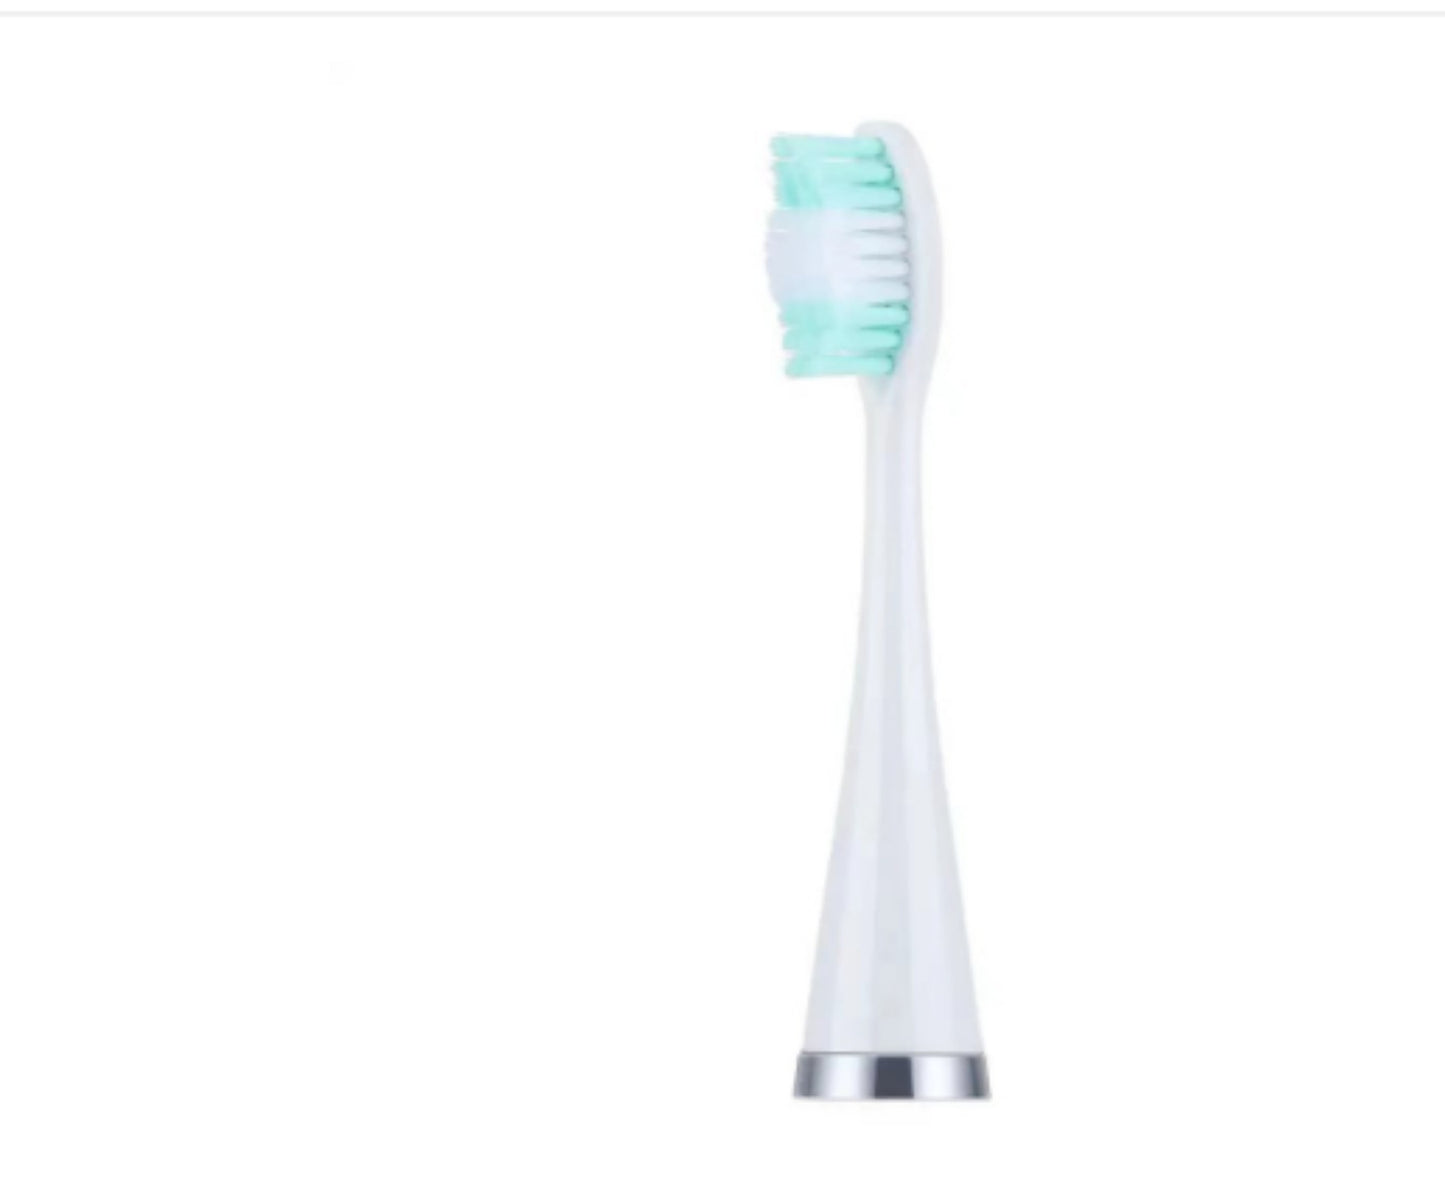 Dental Calculus Remover